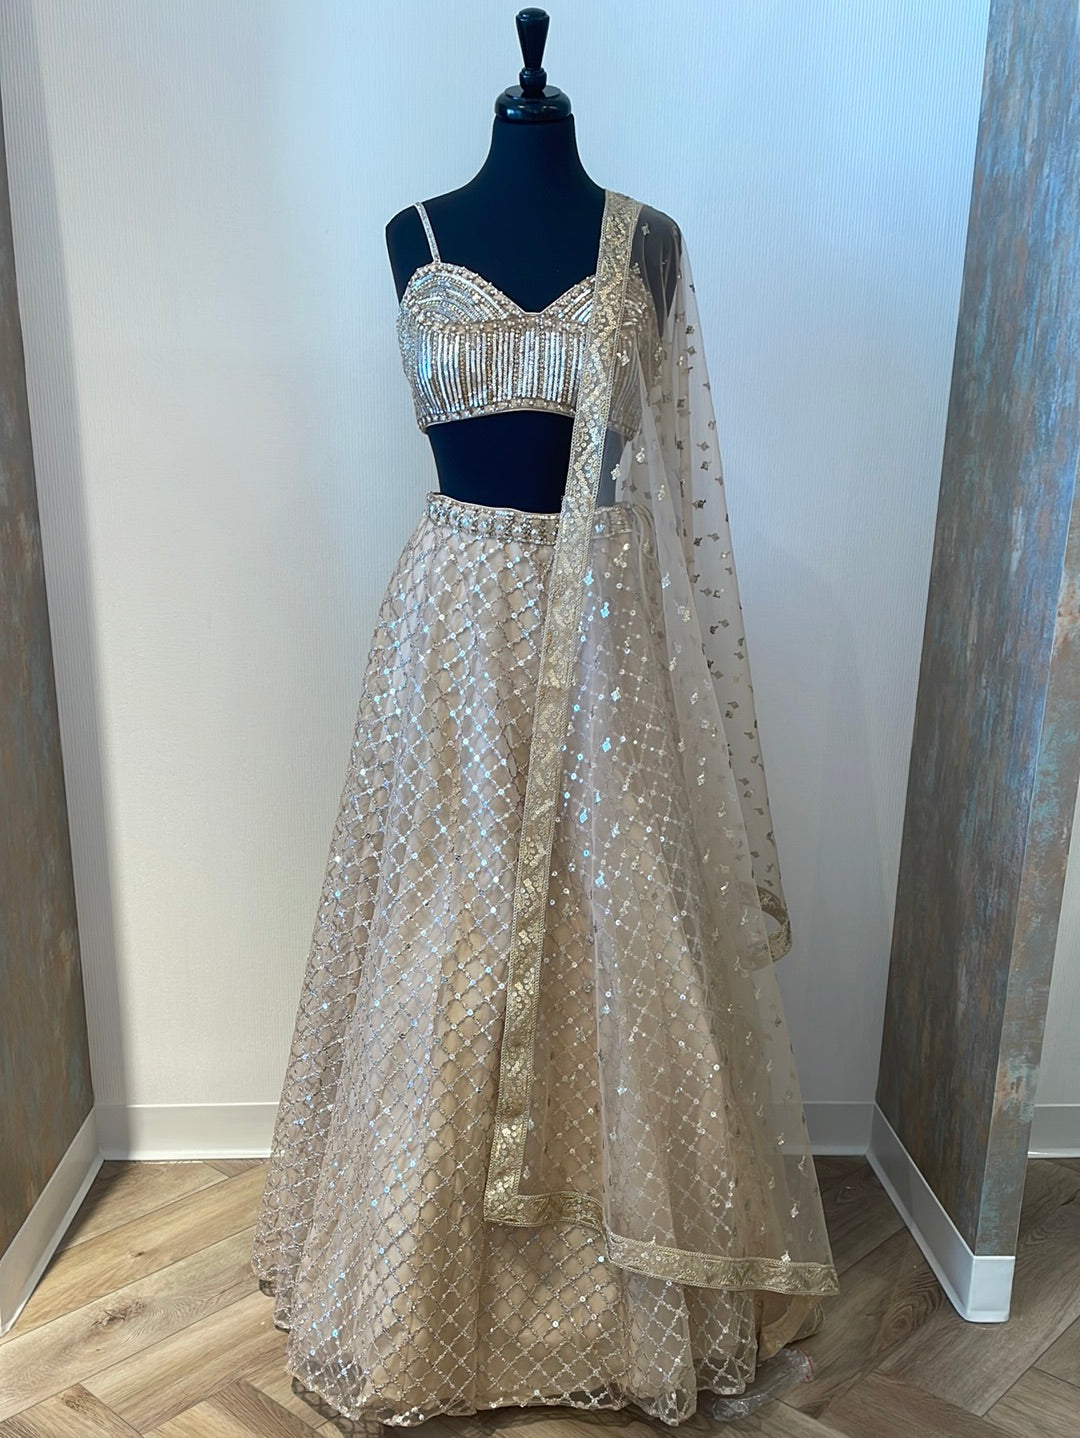 Noodle strap lehenga choli with sequins work all over